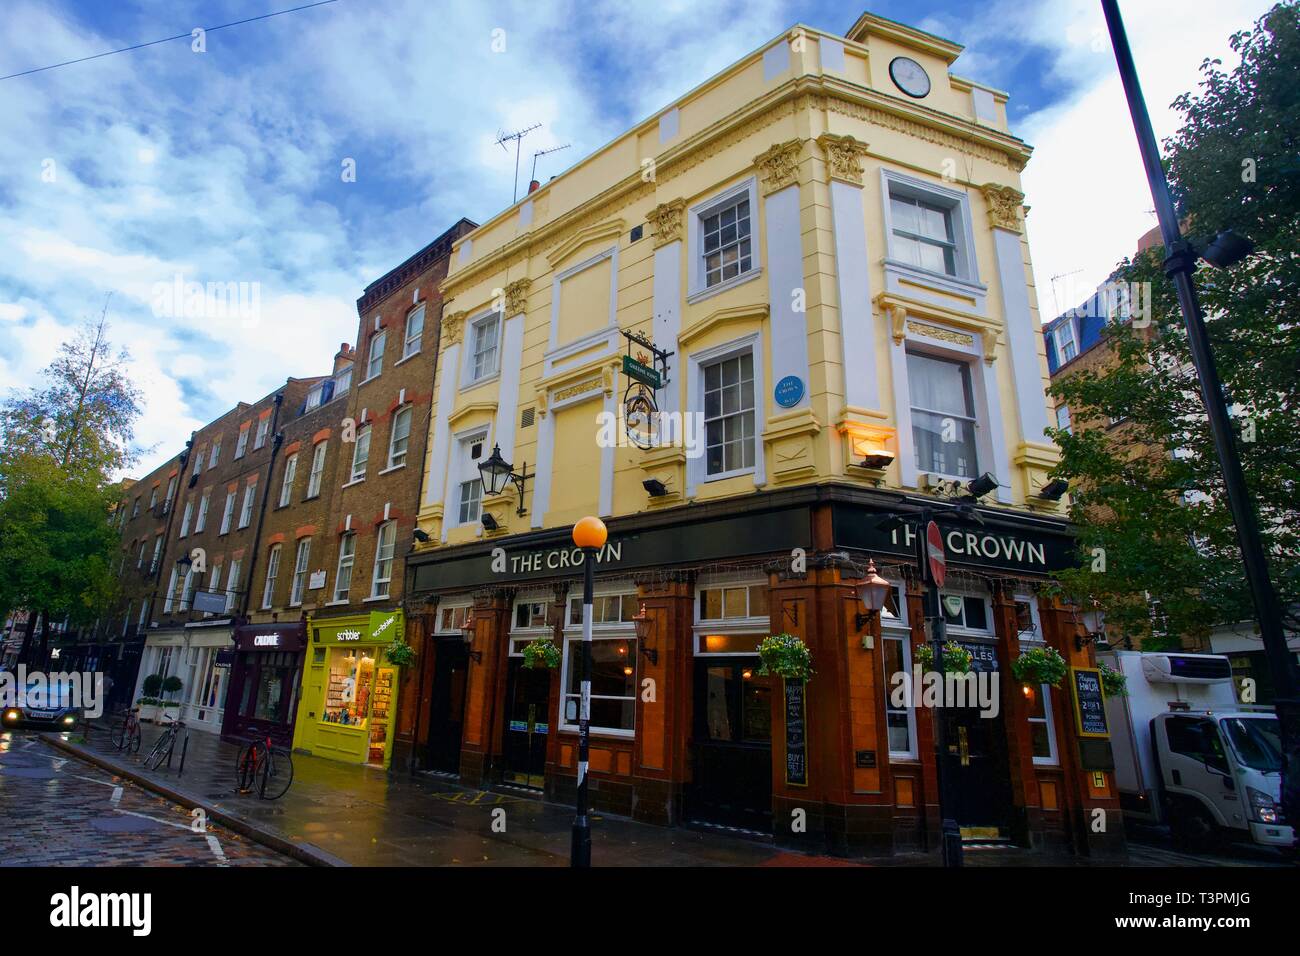 The Crown, Covent Garden, London, England. Stock Photo